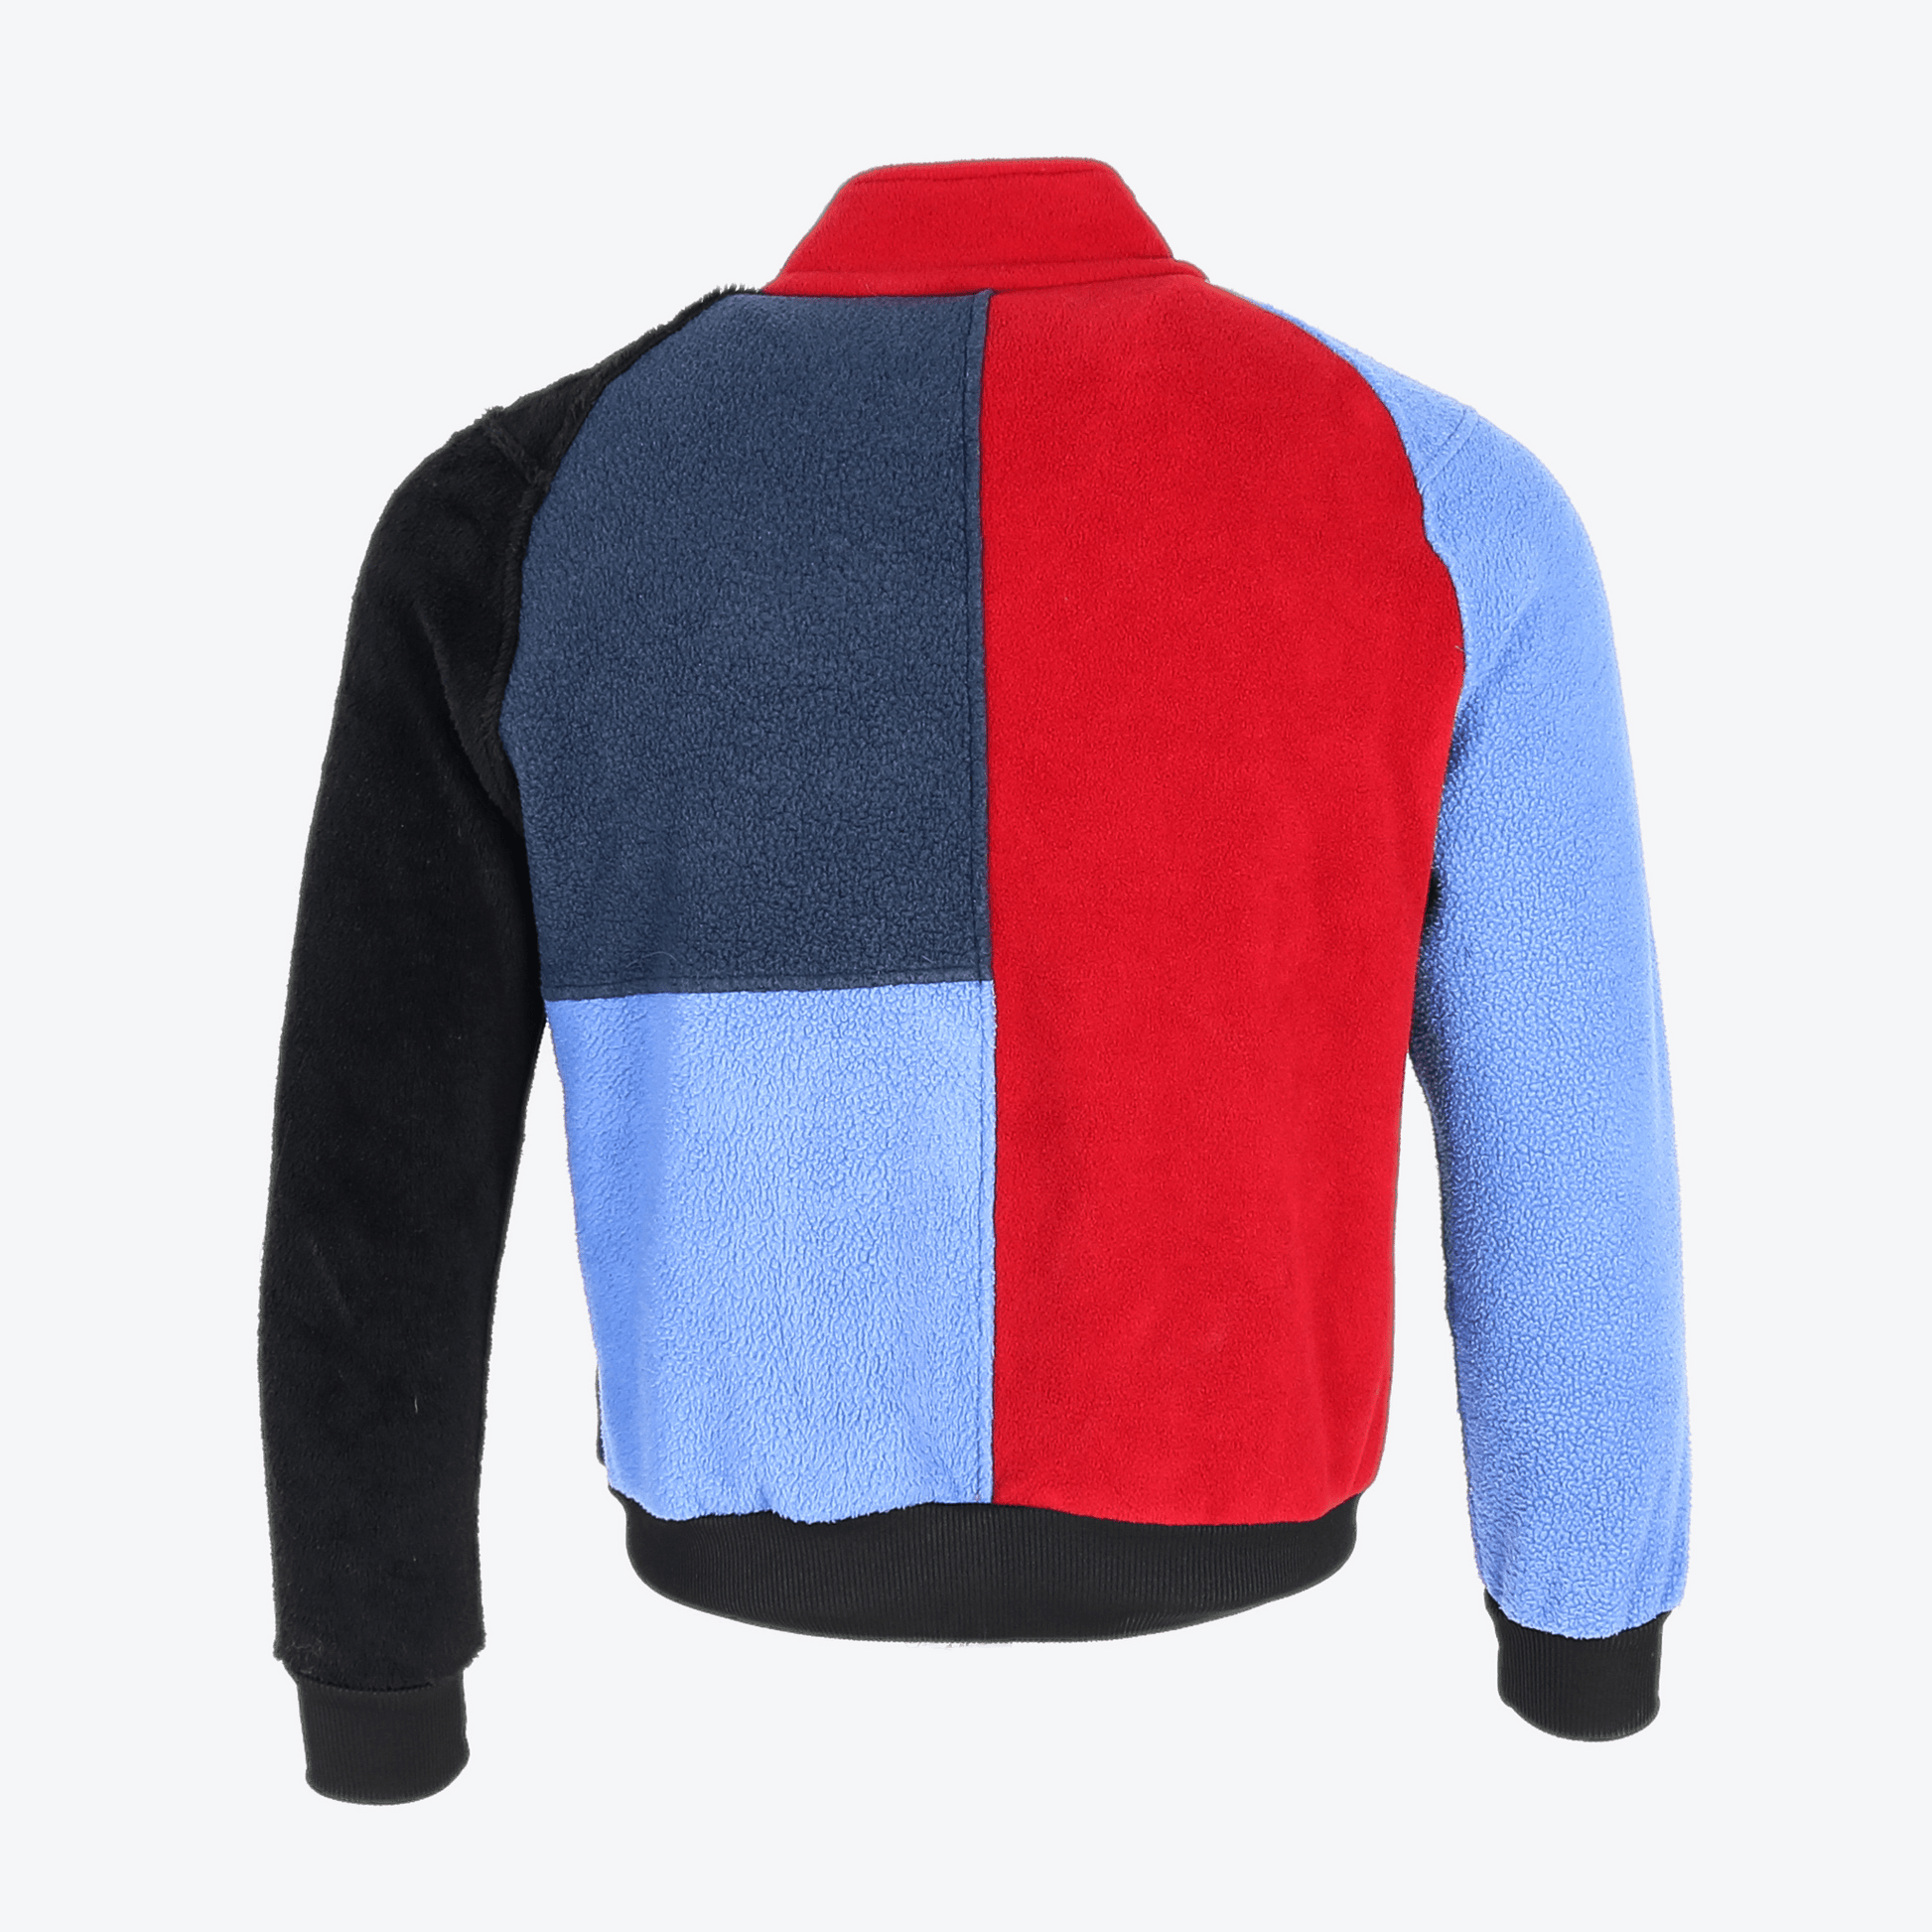 Re-Worked Patagonia Fleece #58 - American Madness